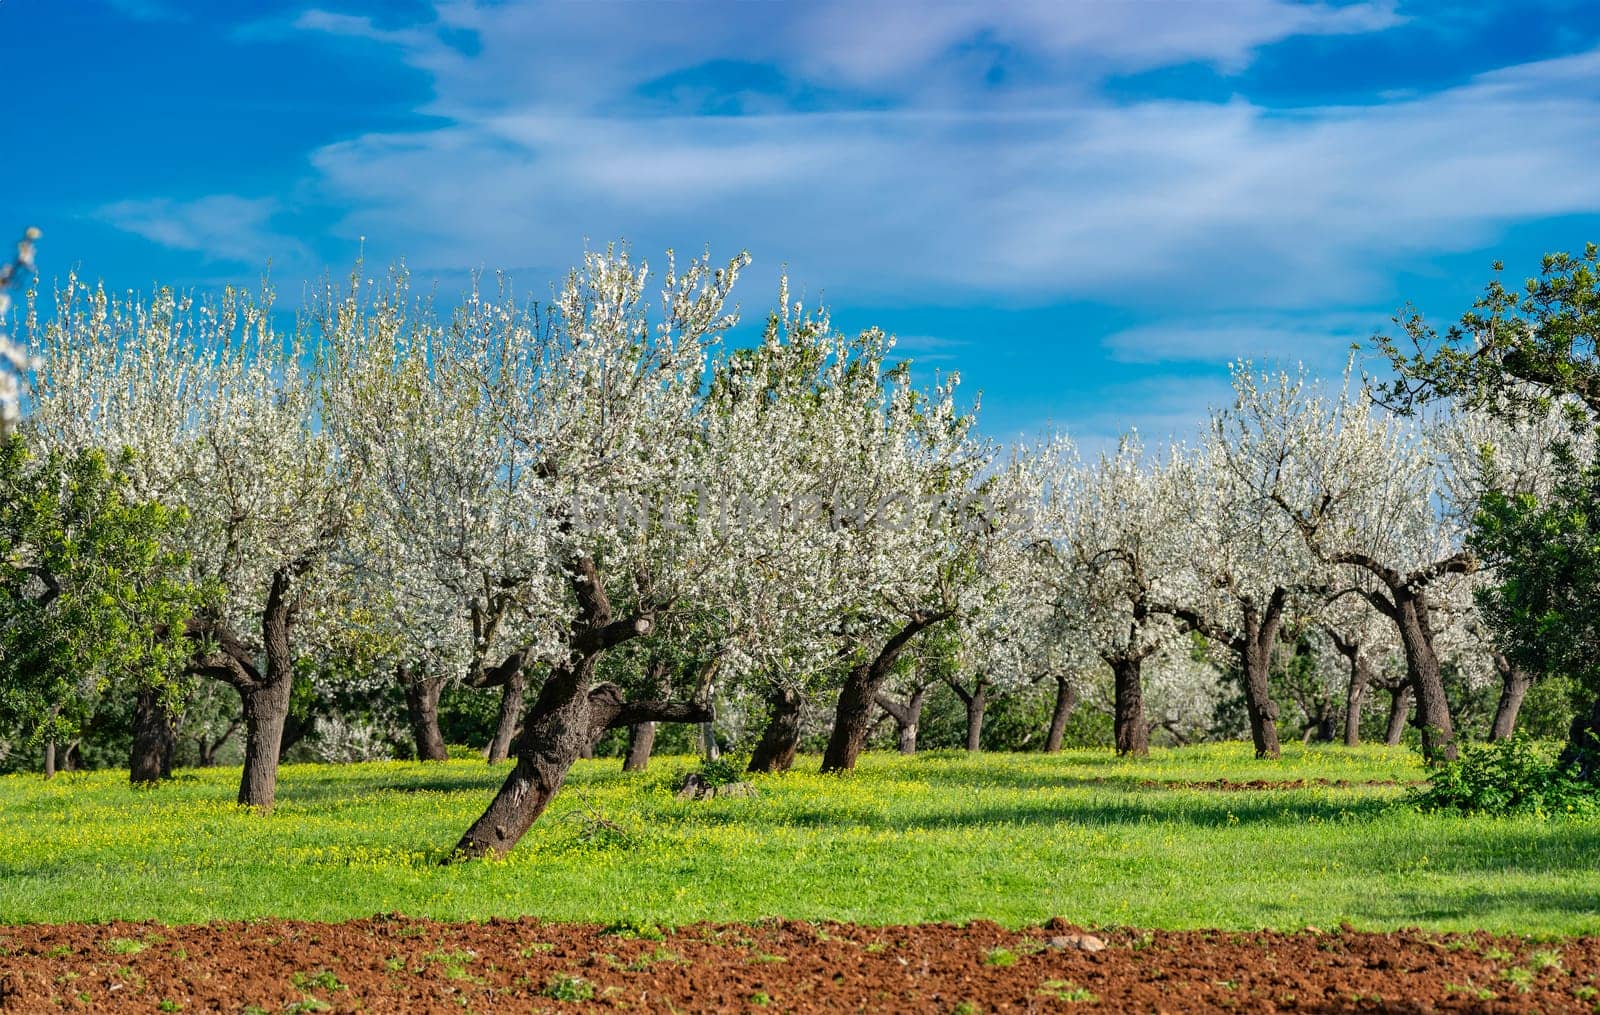 An orchard in full bloom celebrates the arrival of spring with a symphony of white blossoms set against a vivid blue sky. The old, gnarled trunks contrast with the delicate flowers, while a carpet of green with yellow wildflowers completes the picturesque scene.